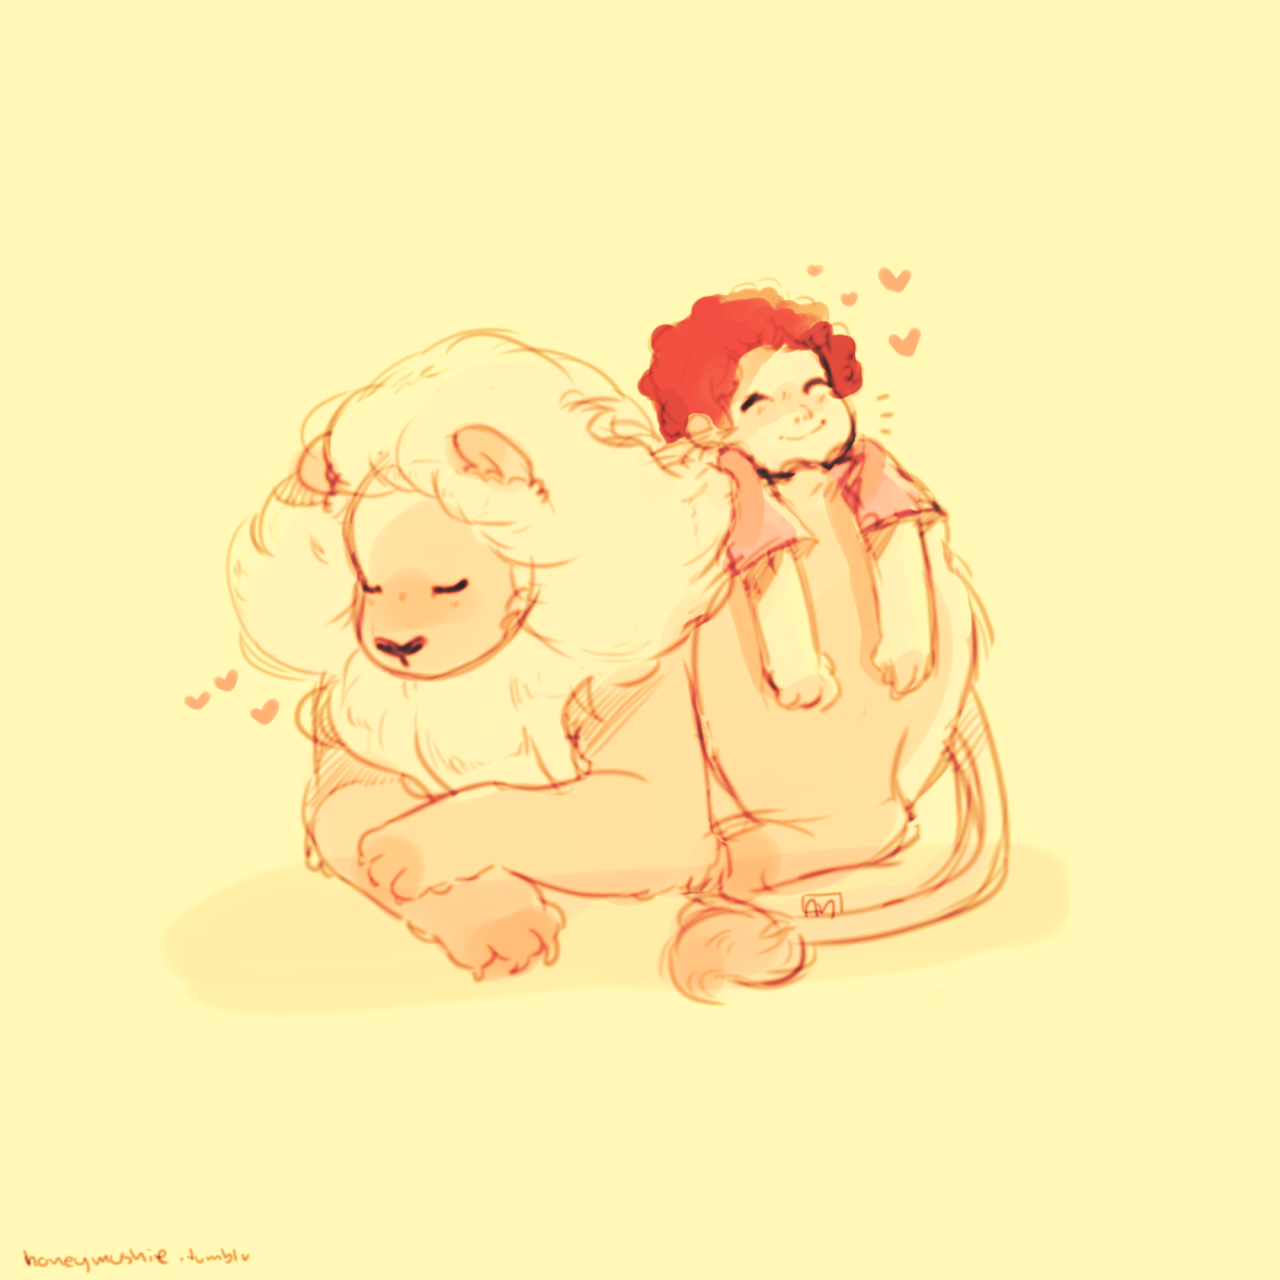 Anonymous said: Hi I just found this blog (I like your art!) and heard you're taking requests, do you think you could draw Lion and Steven together? Answer: k